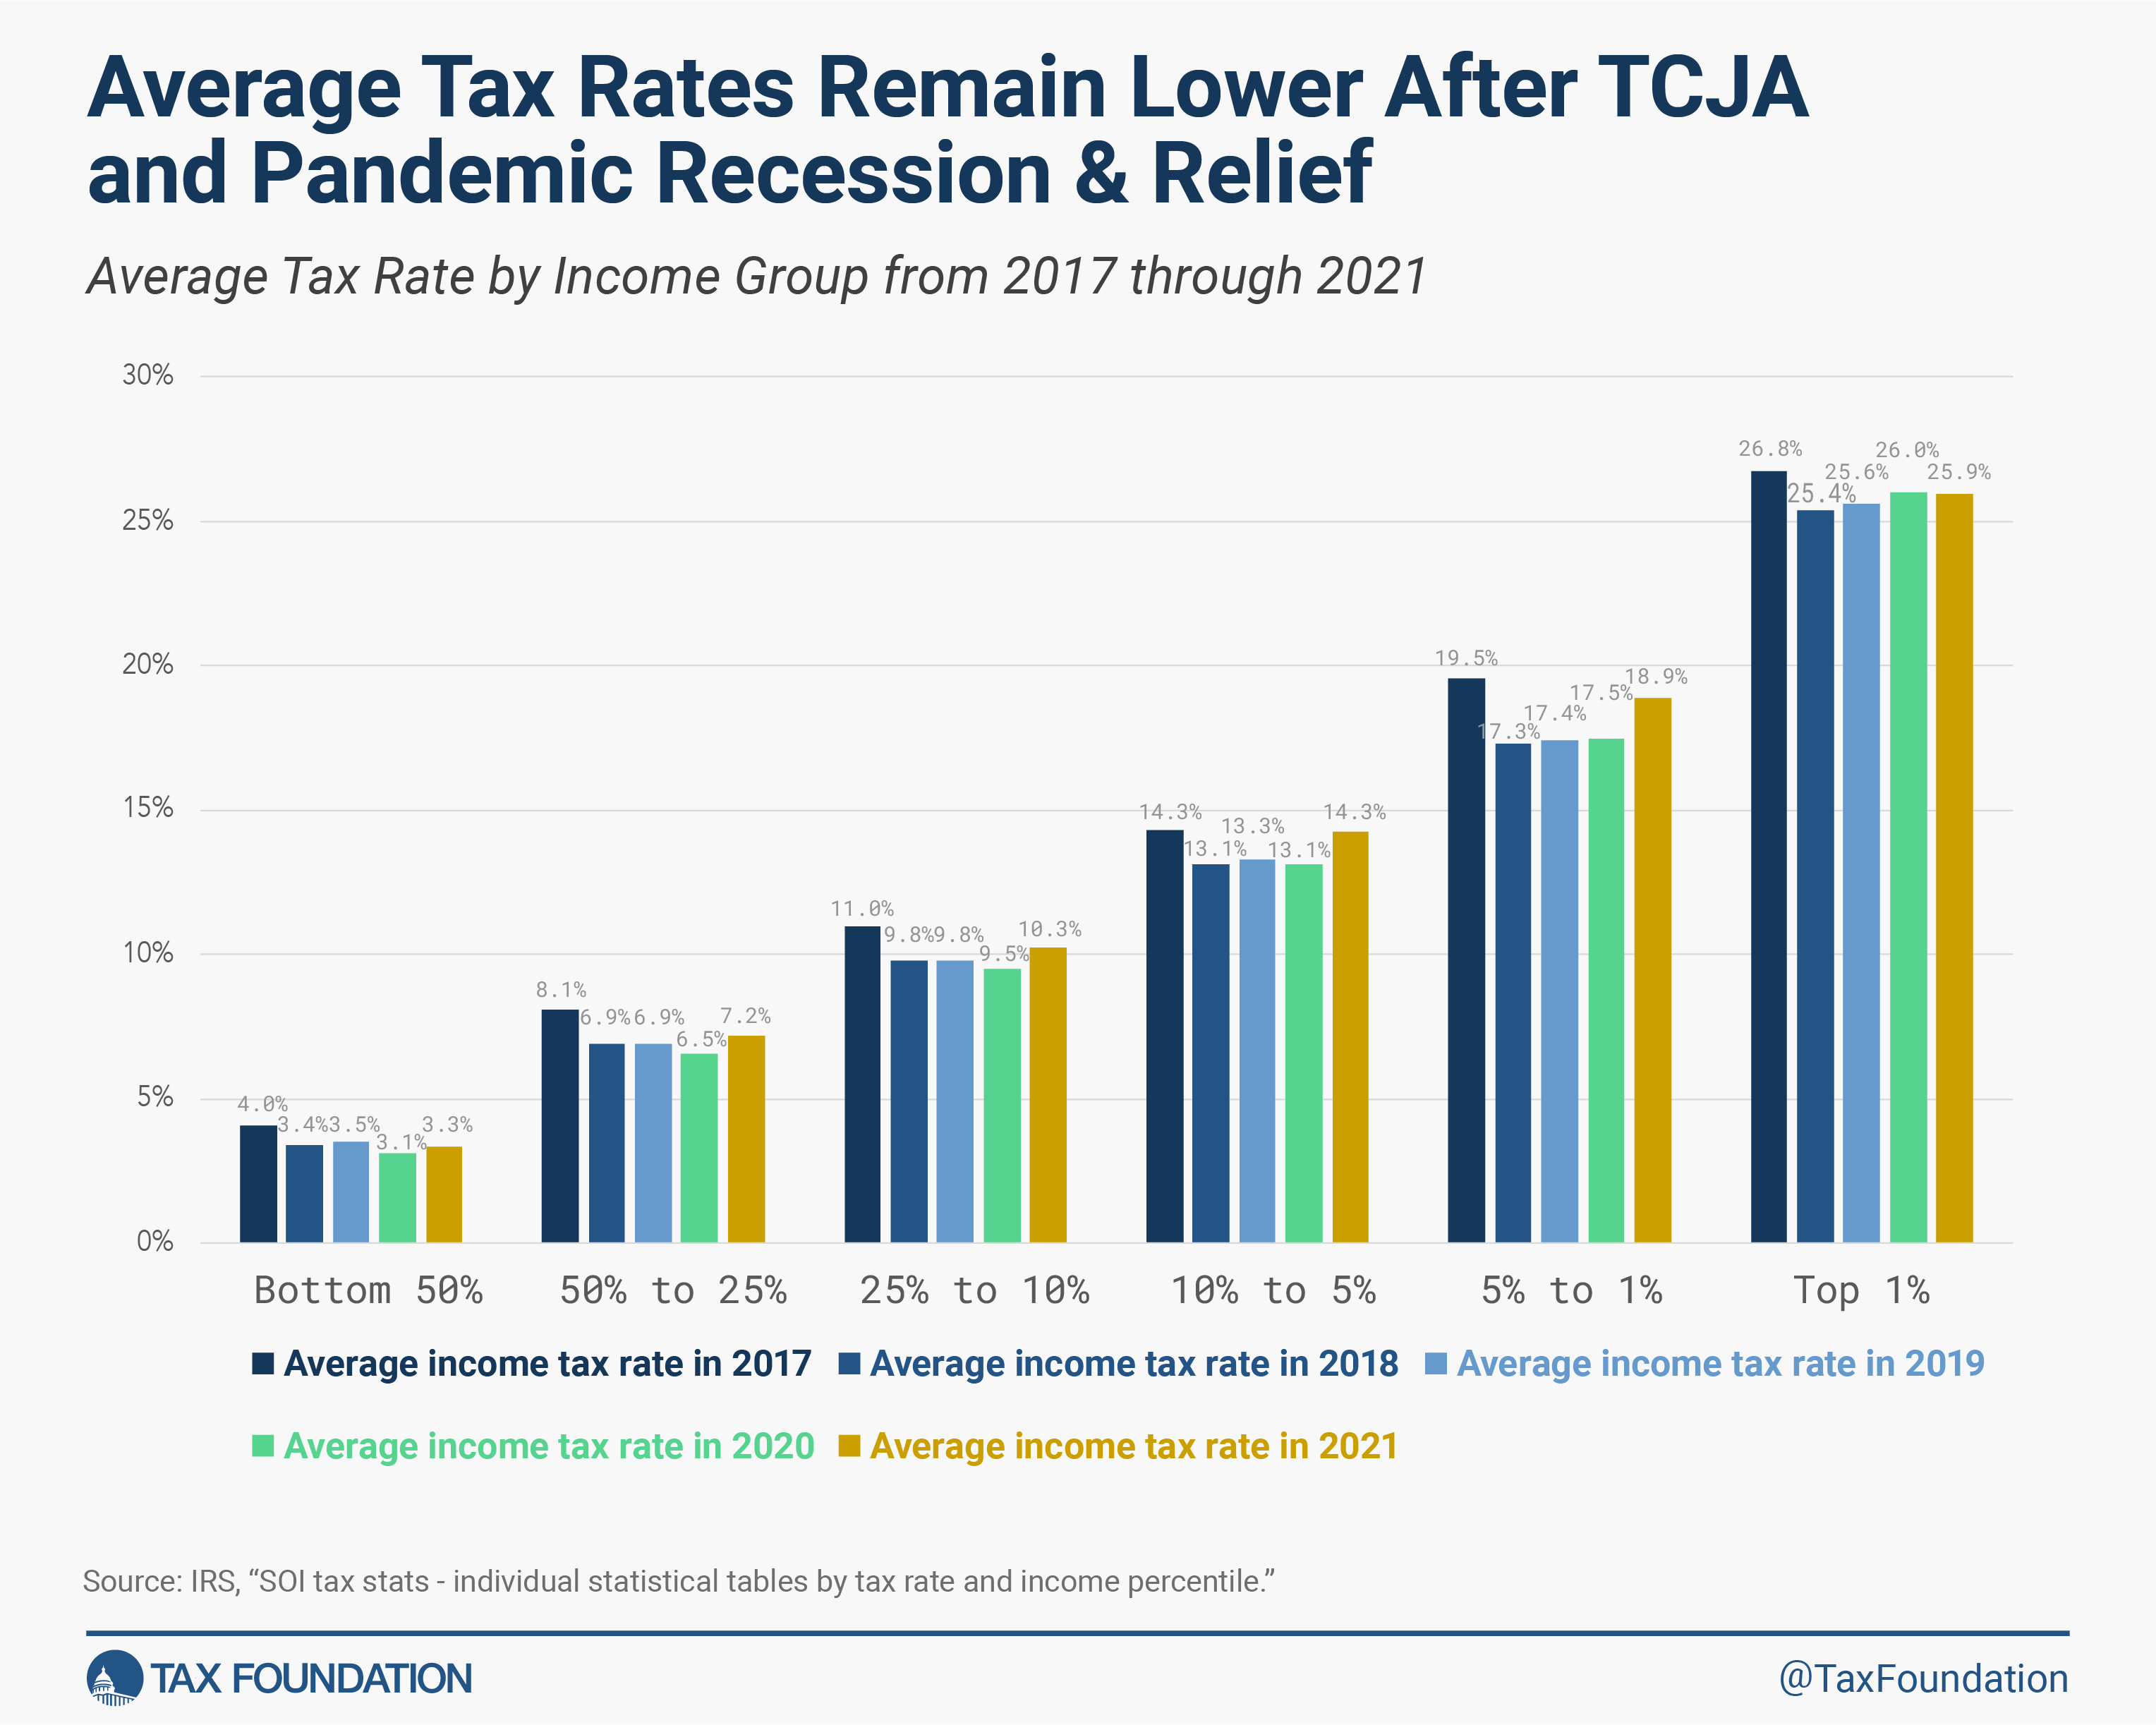 The 2017 tax law or TCJA lowered average tax rates for taxpayers across the income spectrum